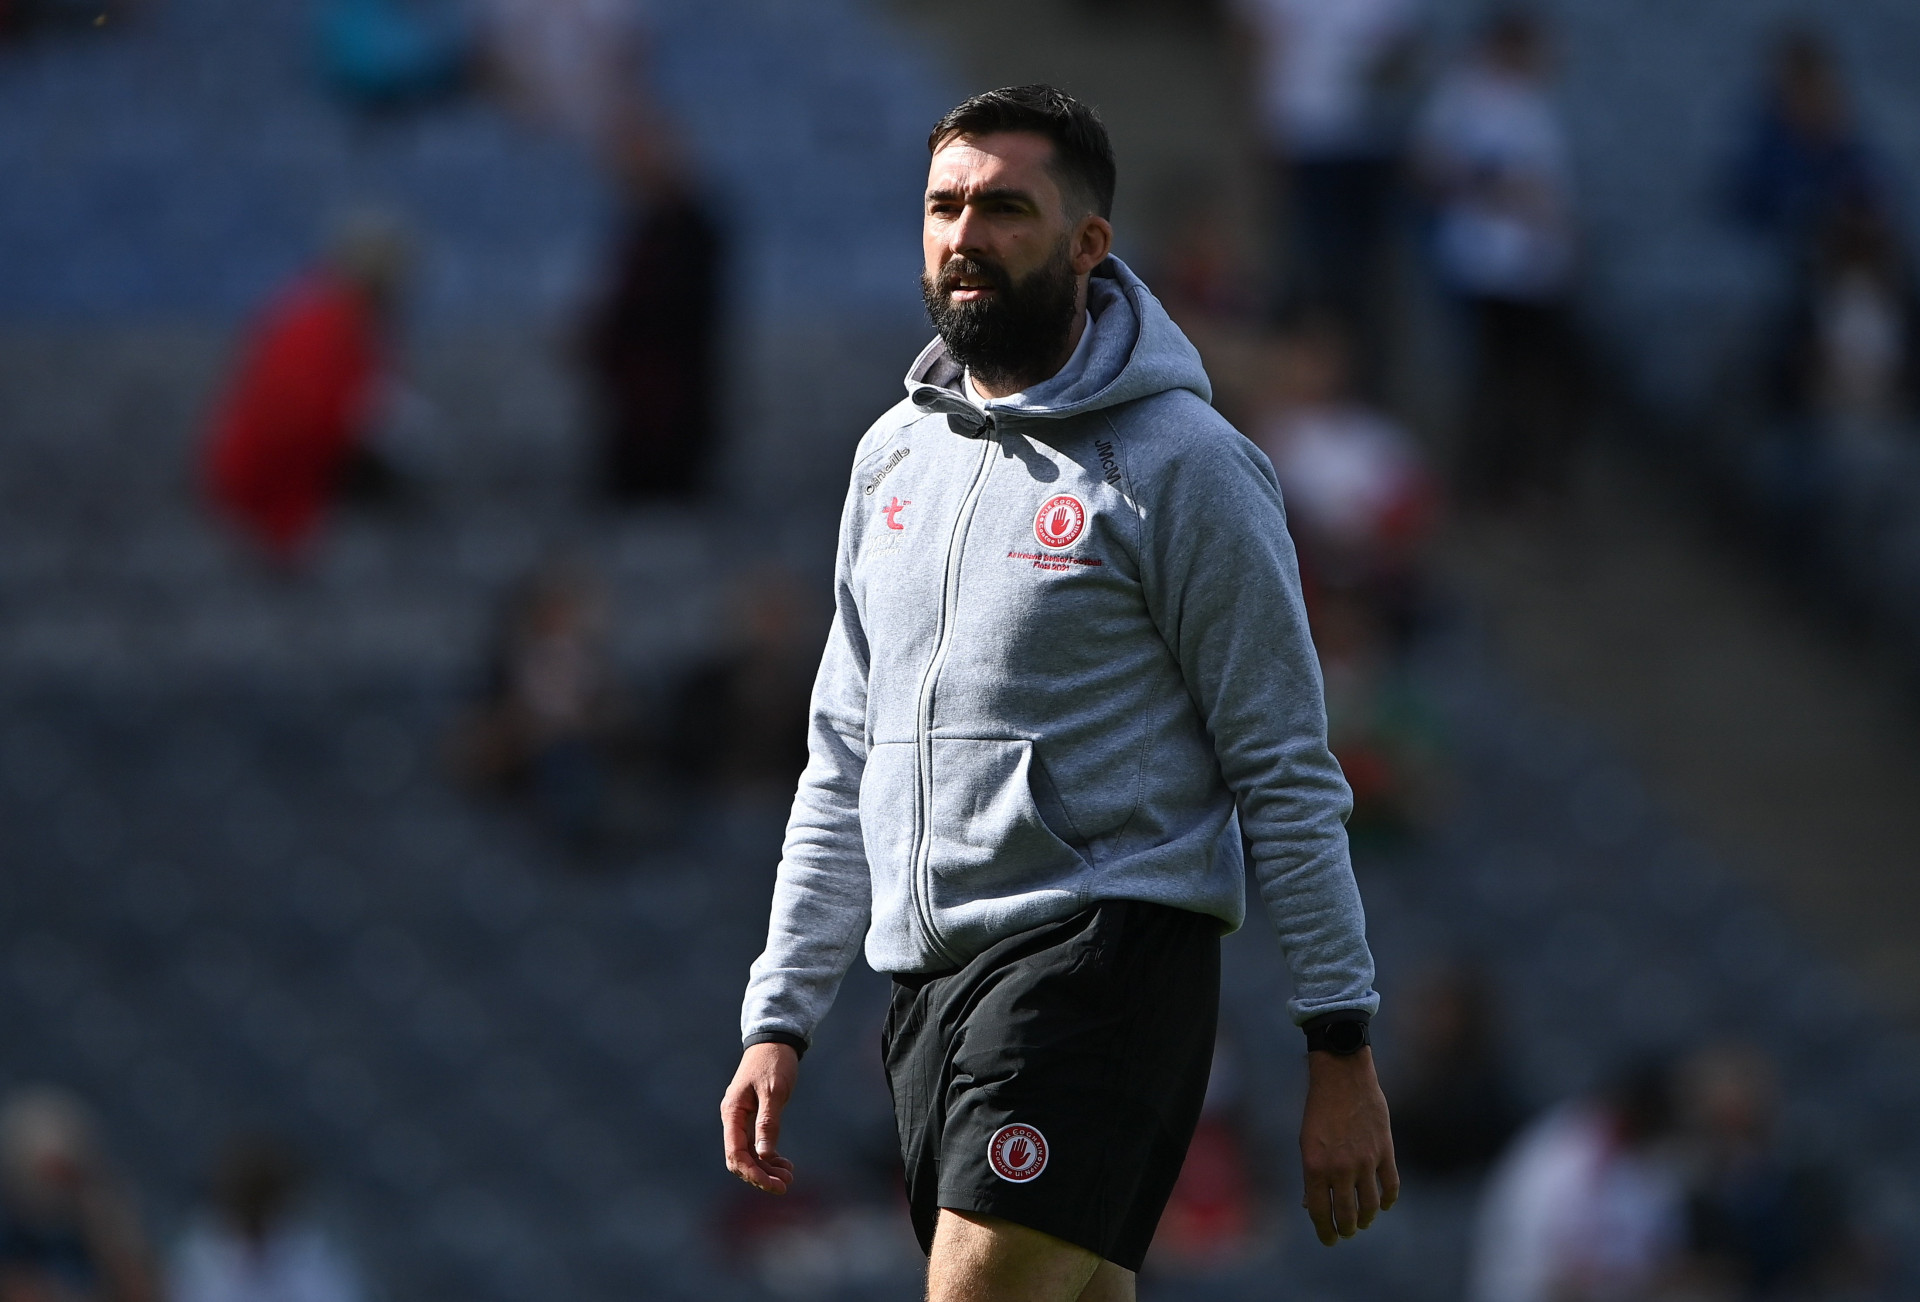 Extended break came at the right time-McMahon